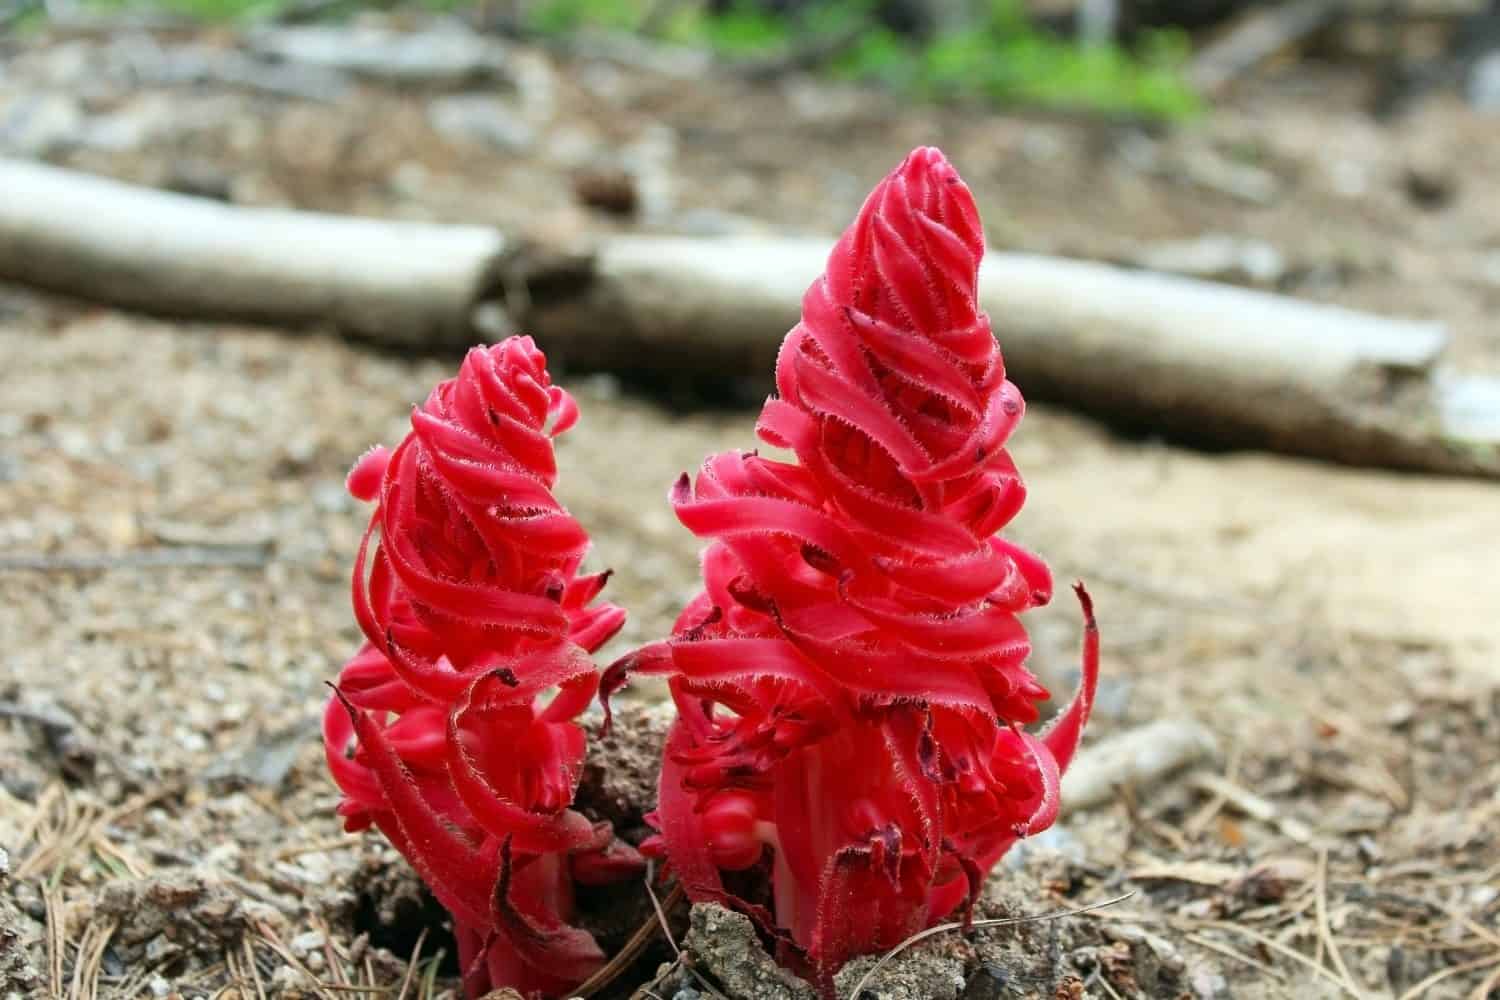 Two rarely seen red snow plants, officially called Sarcodes sanguinea, found on the ground of forest floor by the side of Panorama trail when hiking in Yosemite National Park, Yosemite, California, US